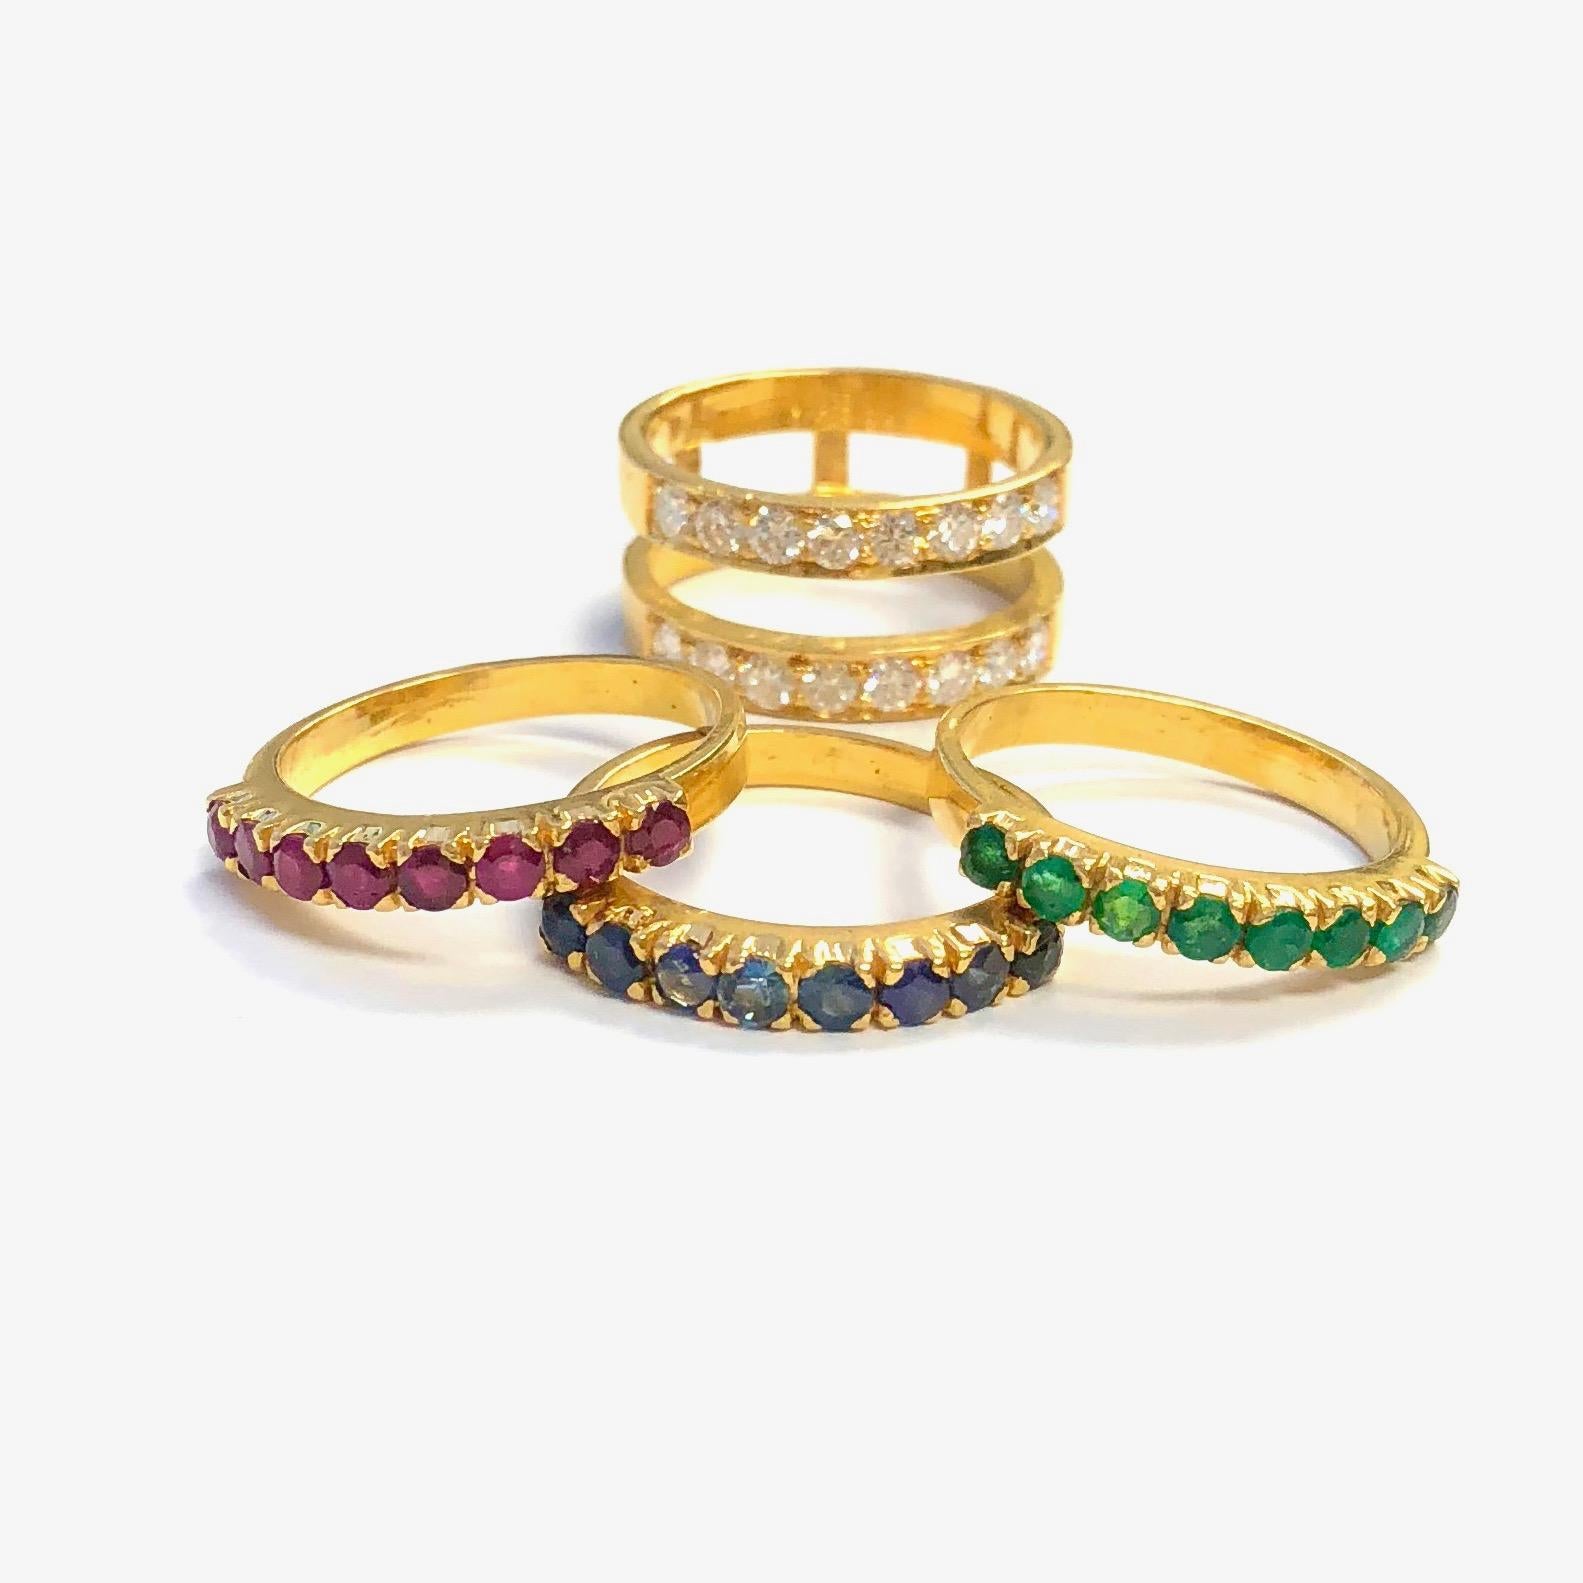 Crafted in 22K gold the set includes 3 colored stone bands and a diamond set ring guard. Each band is set with eight round cut stones, one emerald, one ruby and one sapphire ring. The ring guard is set with sixteen round brilliant cut diamonds,